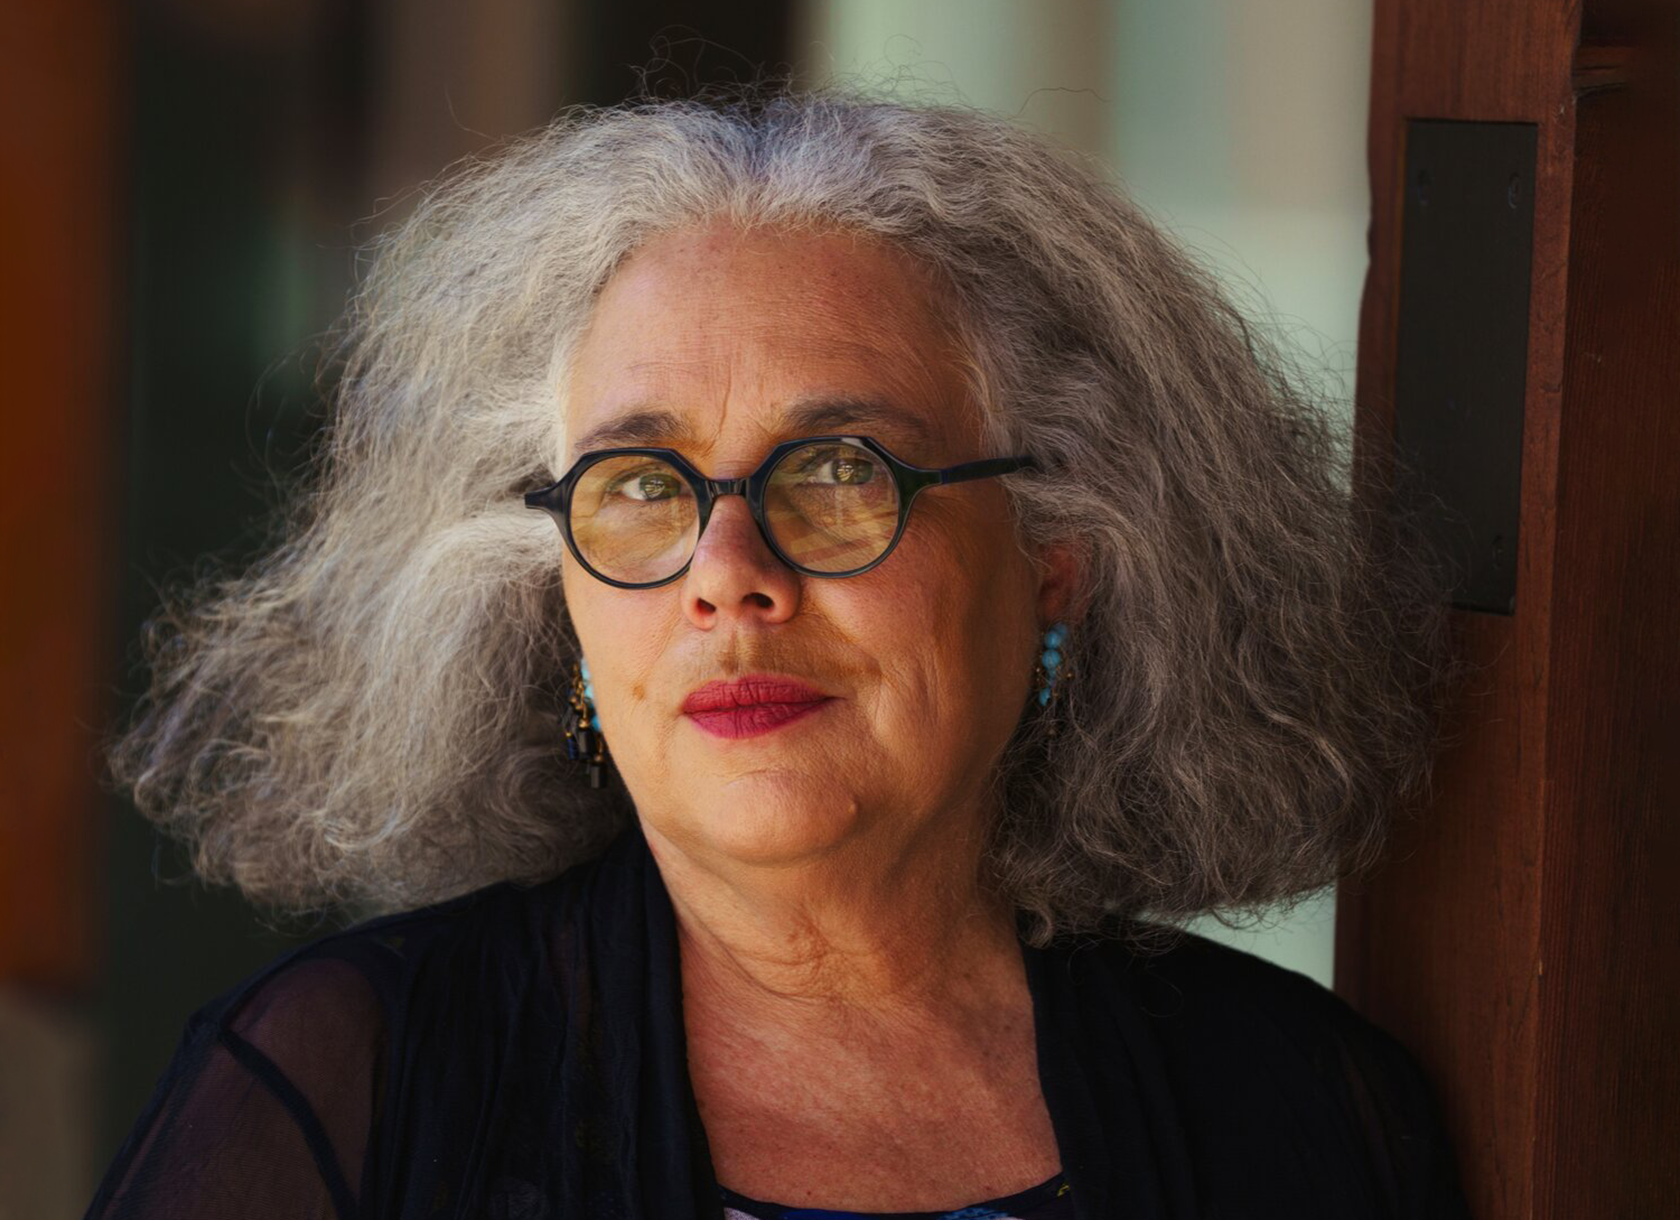 Portrait of Alison Saar '78, renowned artist and alum of Scripps College in Southern California. She is a black woman with gray, shoulder-length hair and glasses.